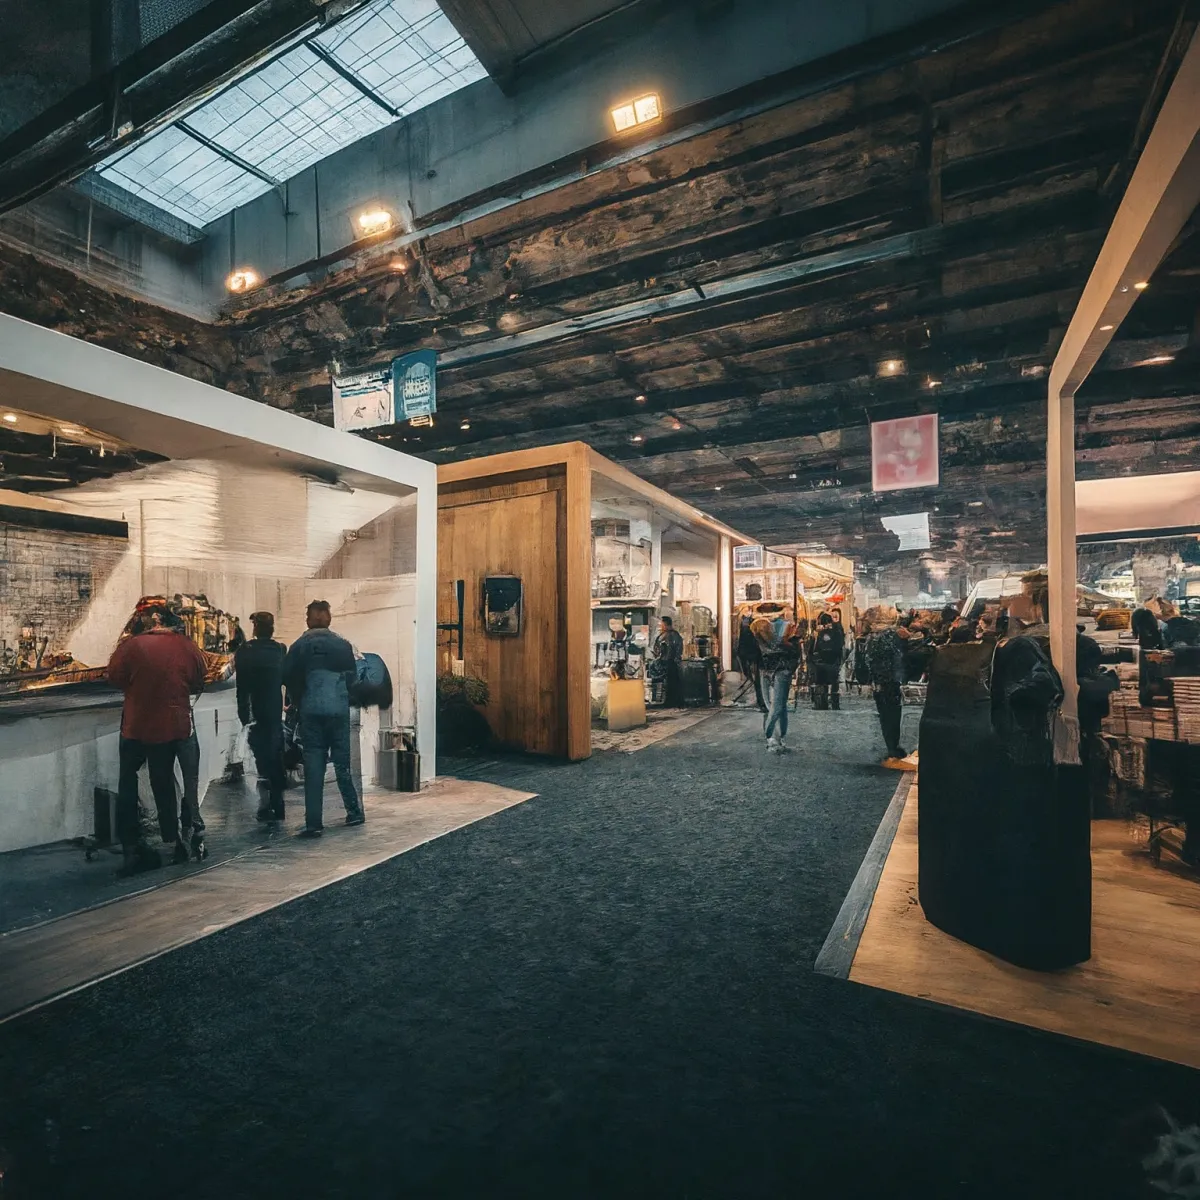 Image of a Trade Show floor with booths on either side of the aisle